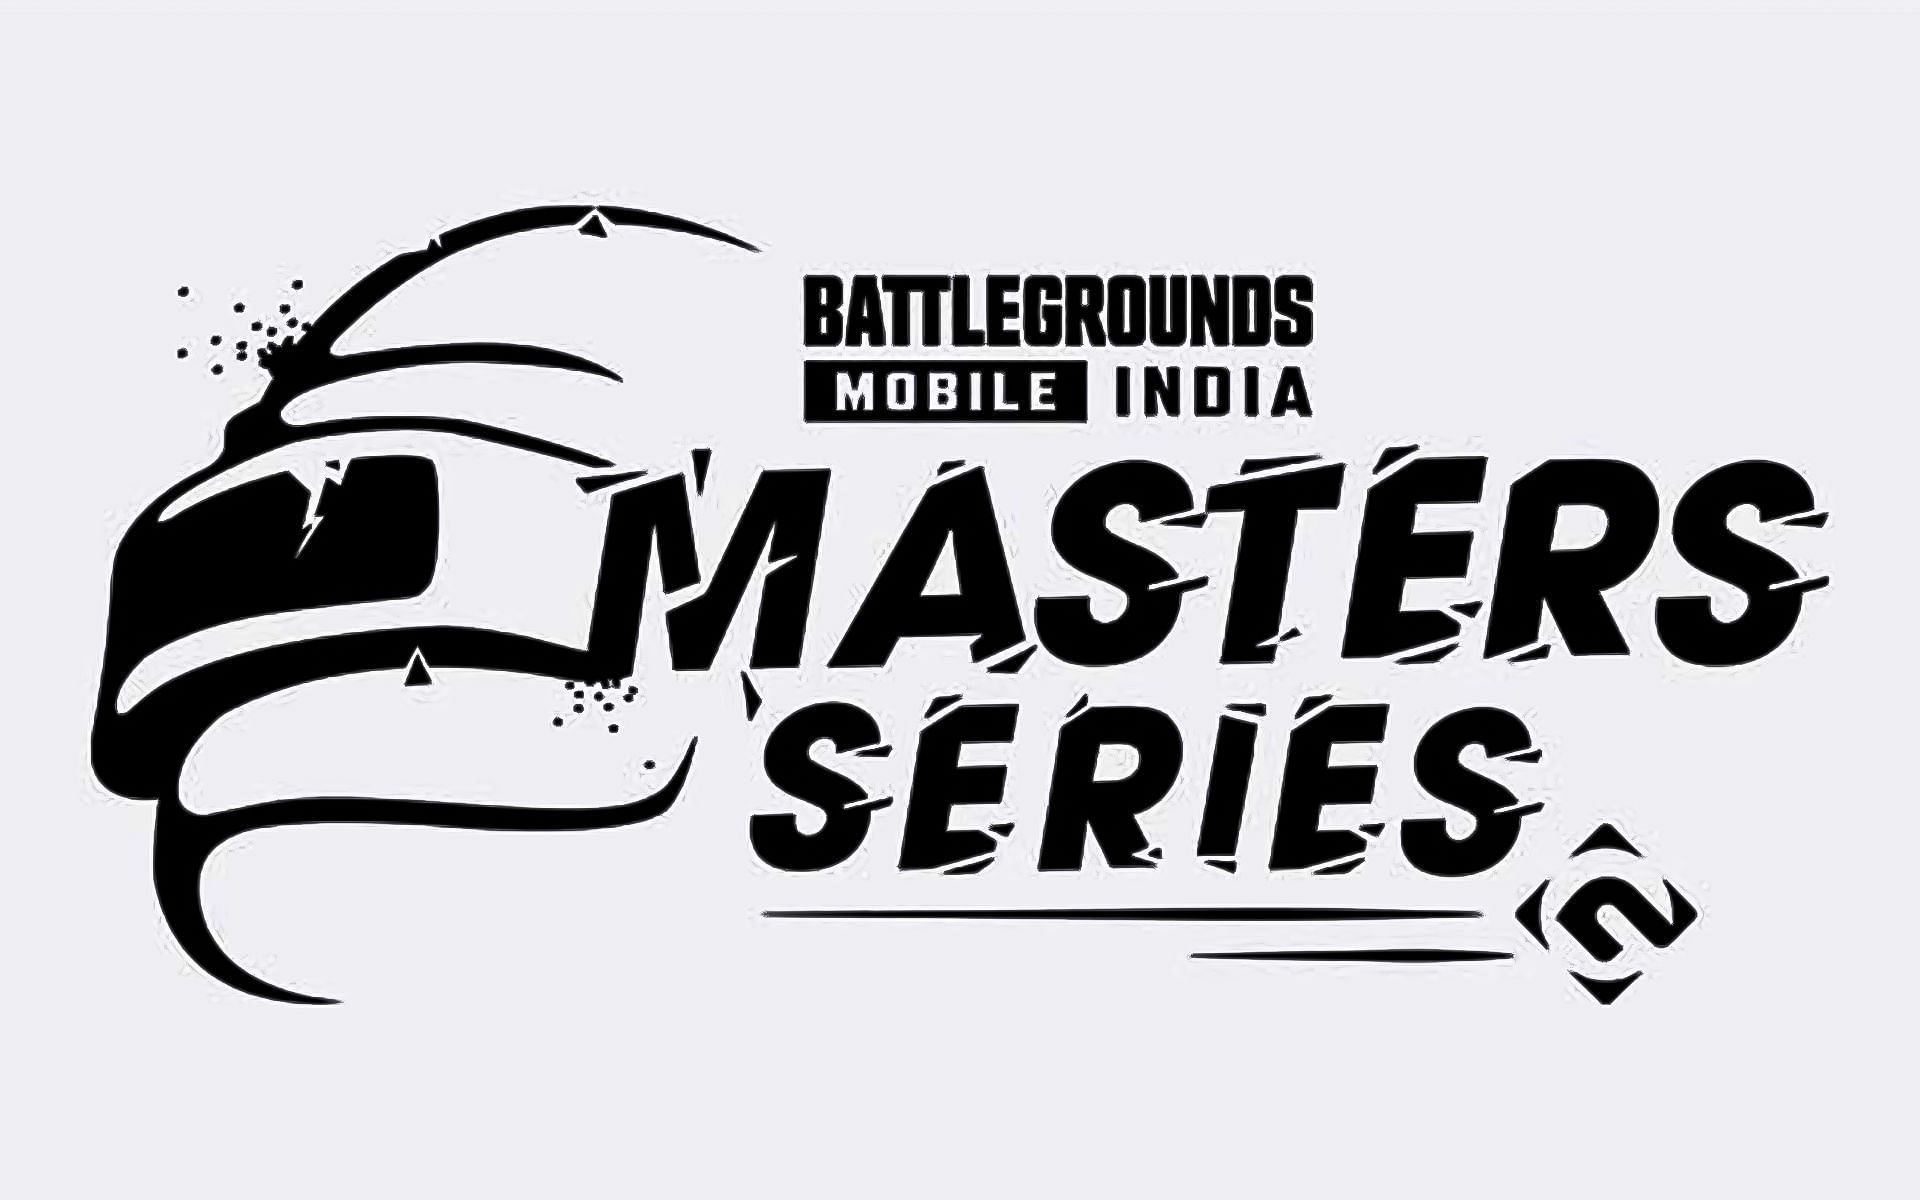 BGMI Masters Series 2022 is telecast live on Star Sports 2 (Image via Nodwin Gaming)